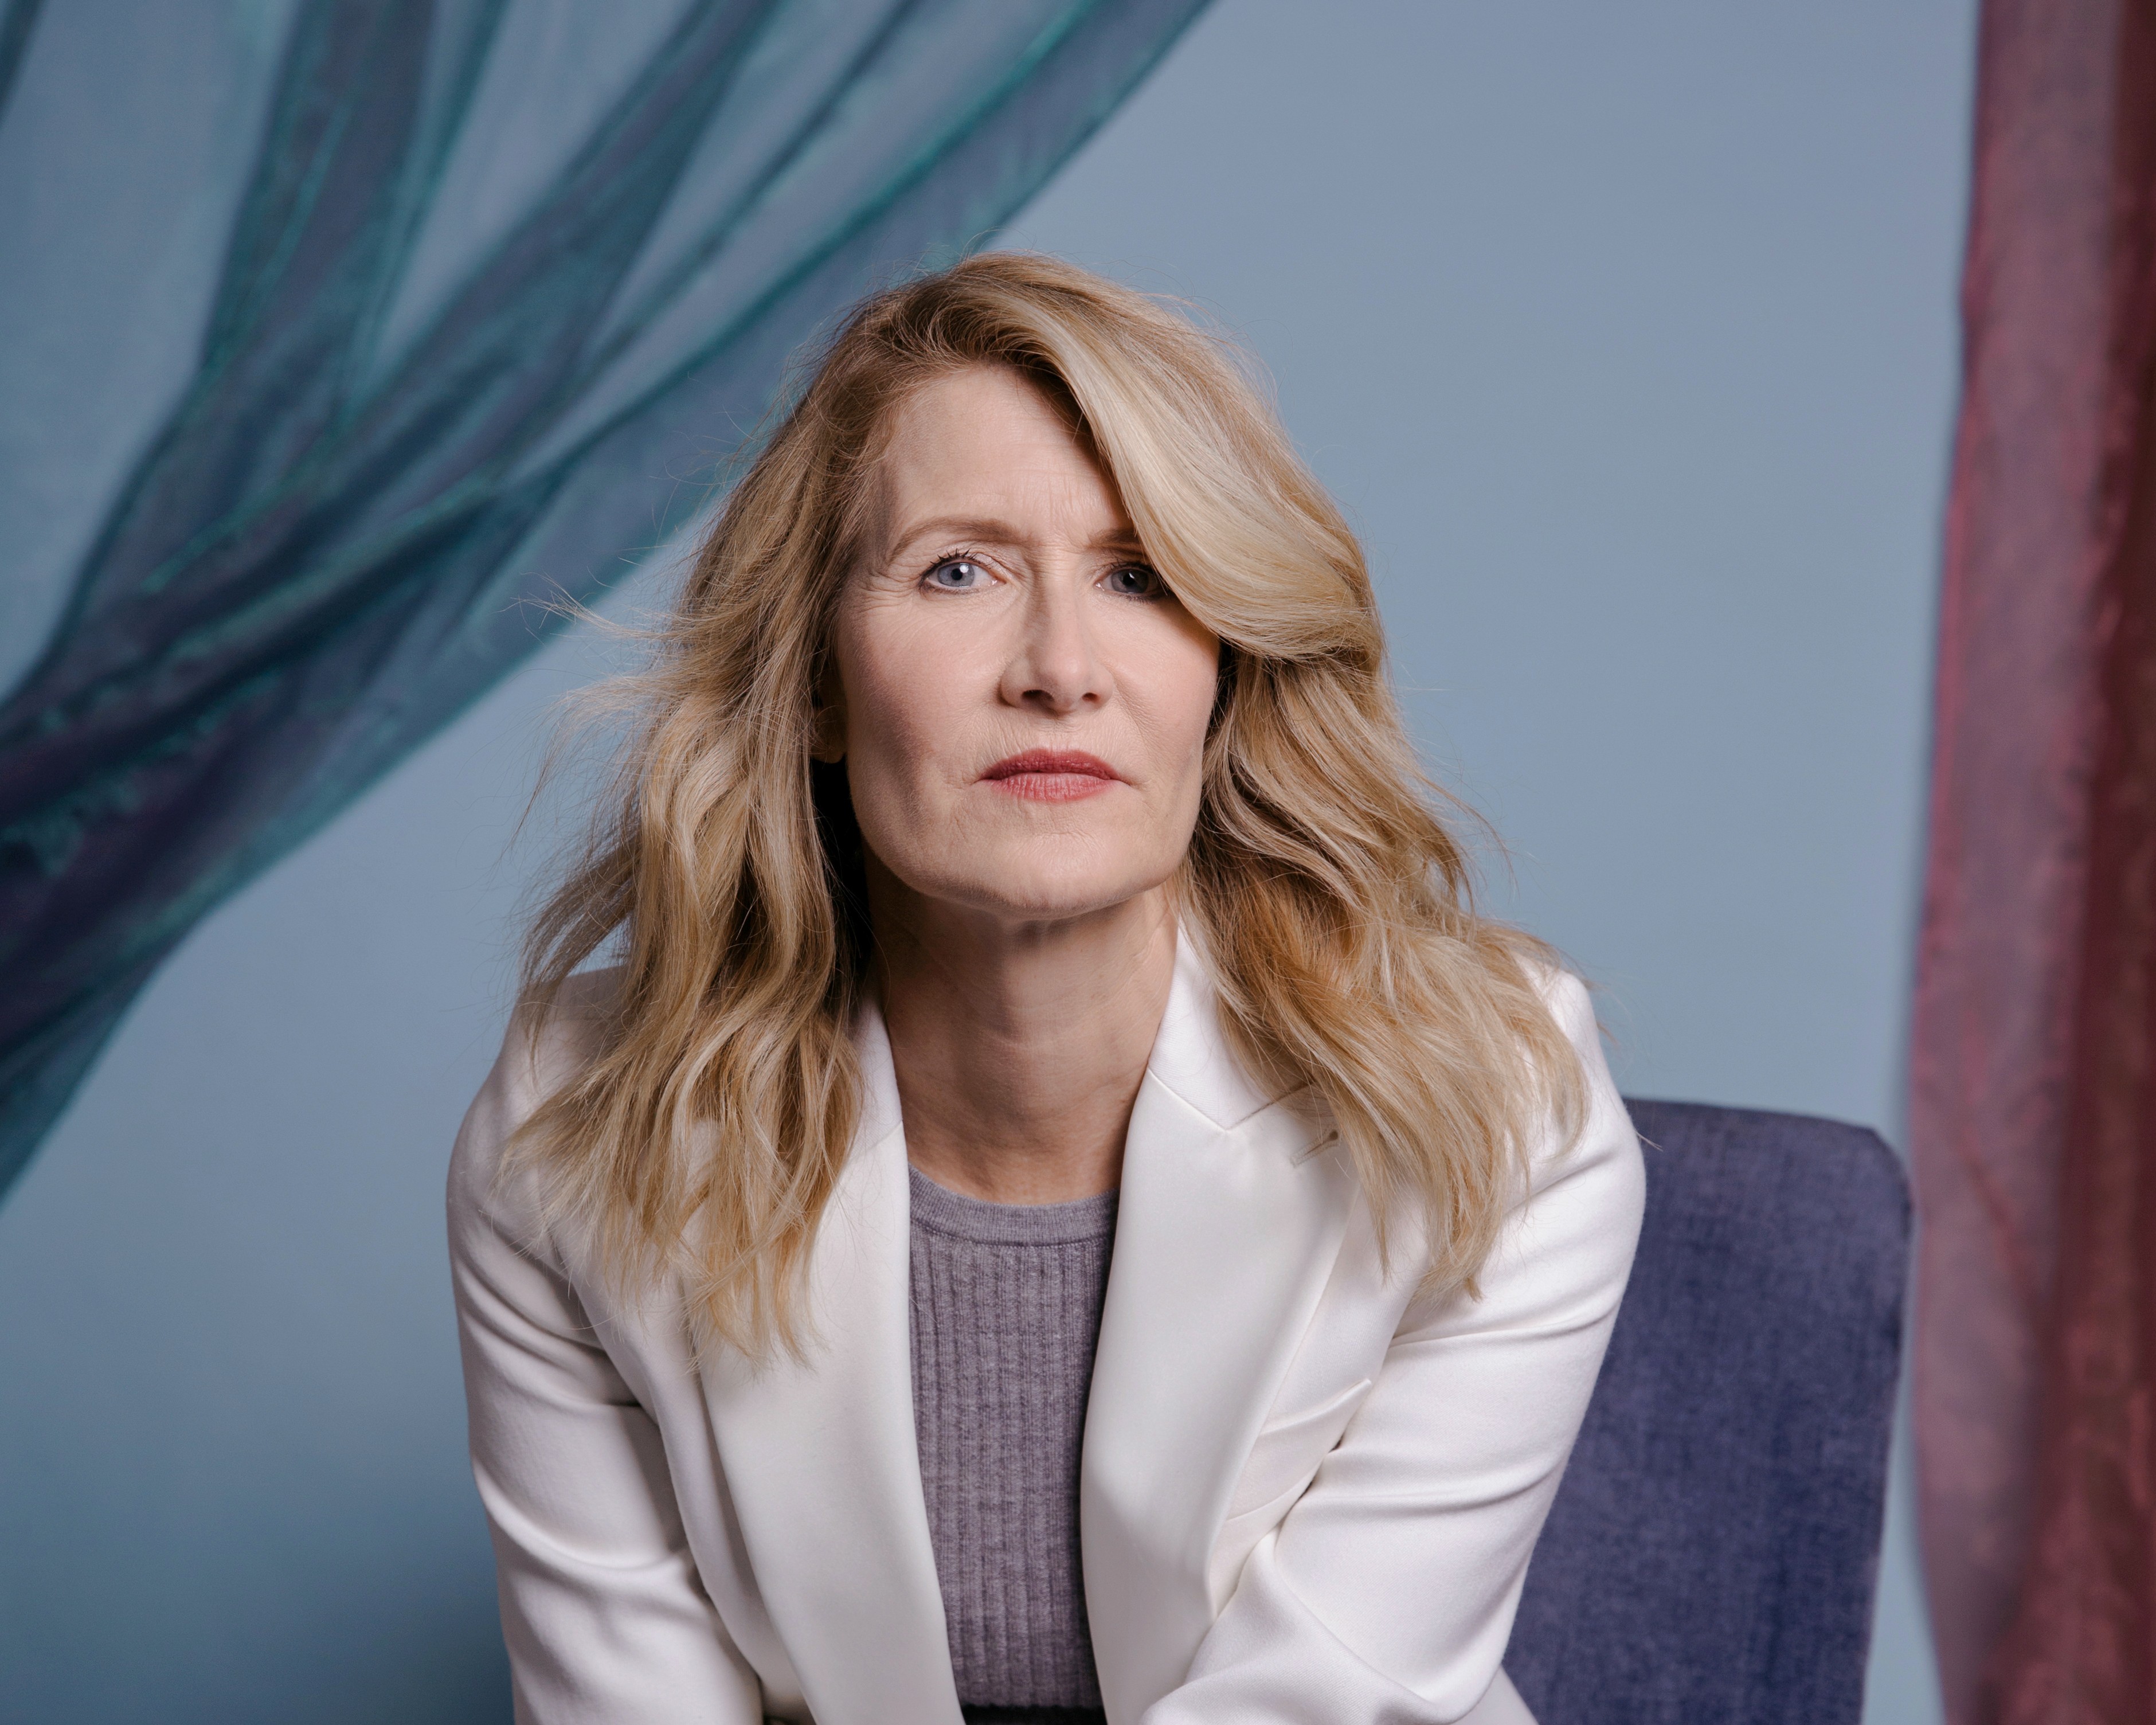 Laura Dern had two major film roles this year in Marriage Story and Little Women. Photo: The Washington Post